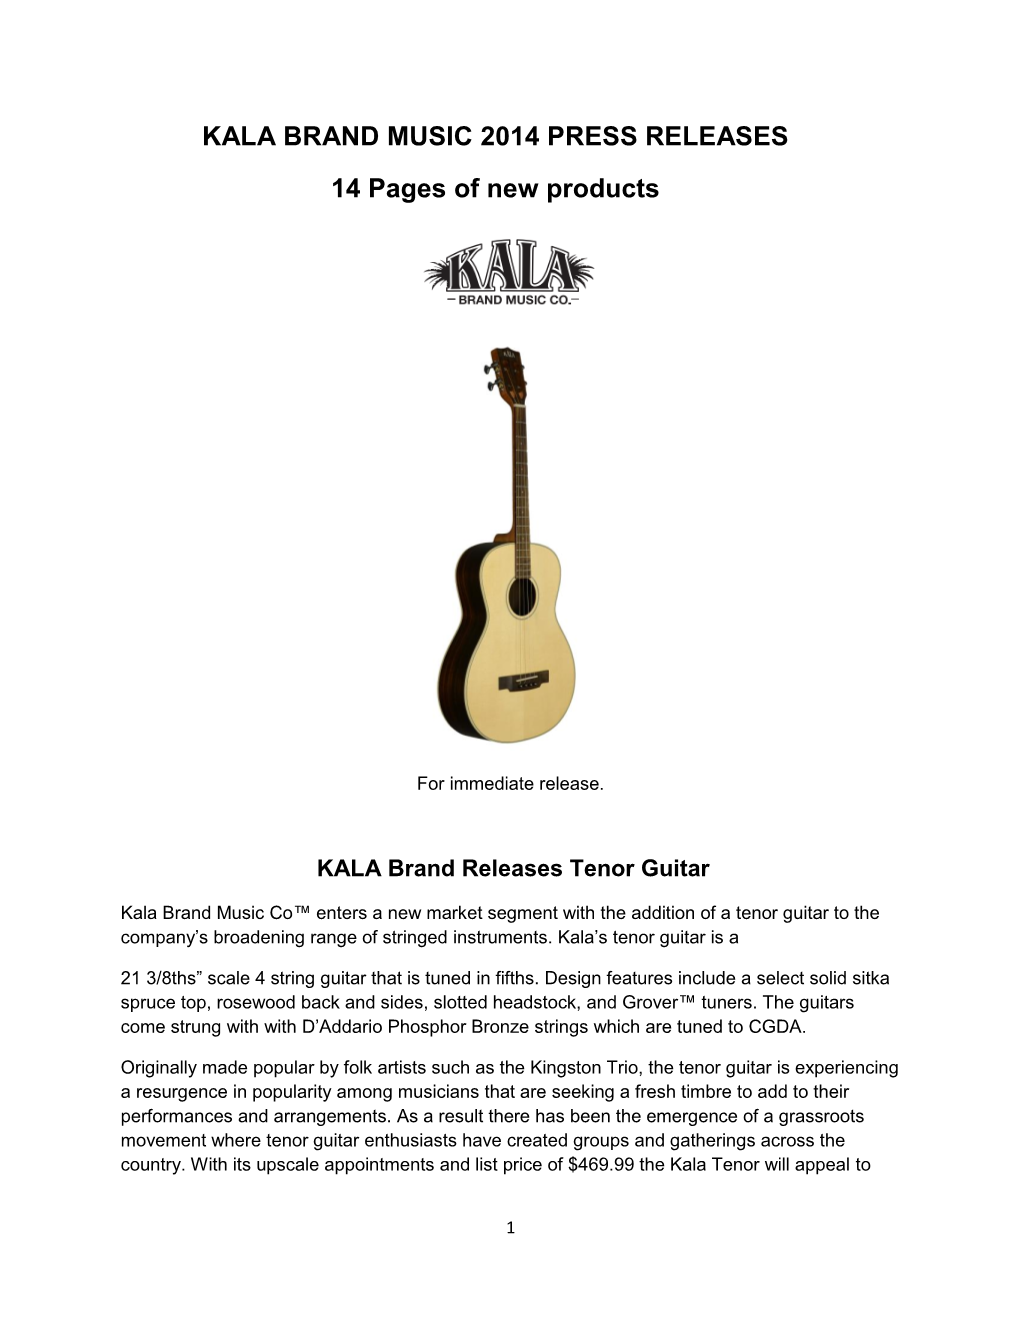 KALA BRAND MUSIC 2014 PRESS RELEASES 14 Pages of New Products